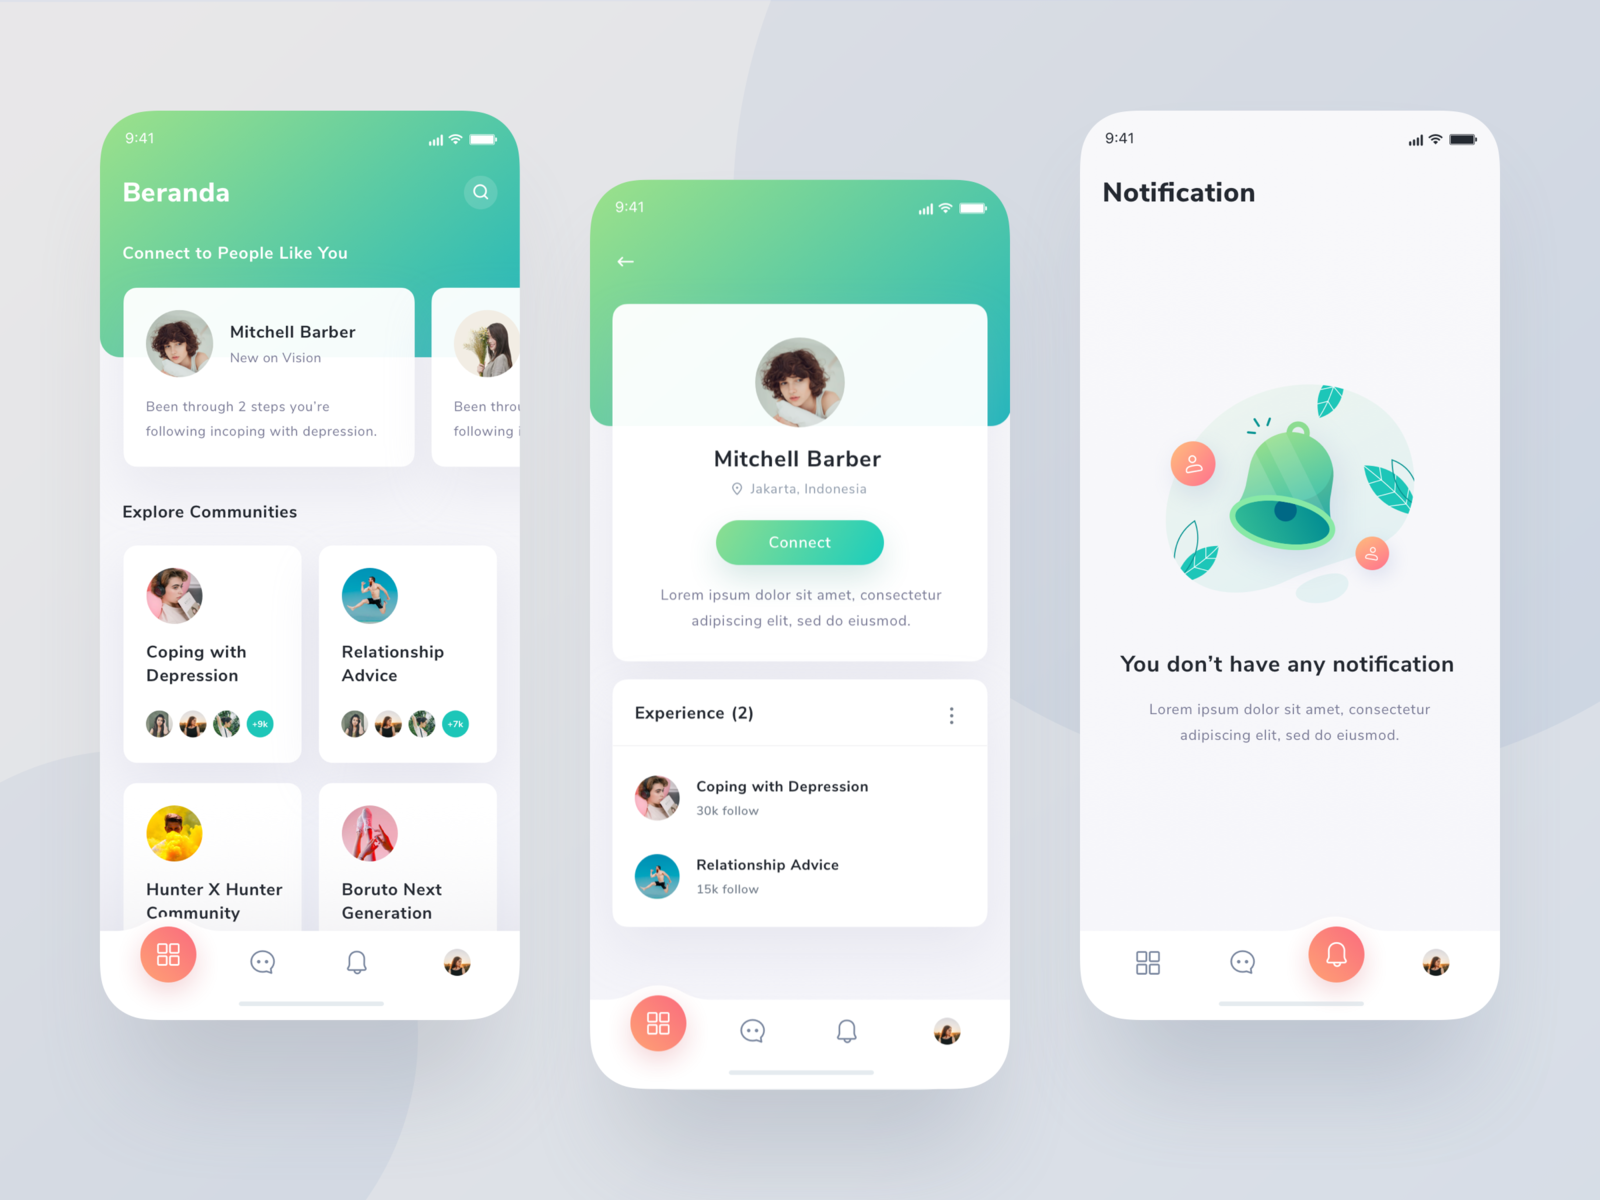 Community App - Exploration by Budiarti R. on Dribbble